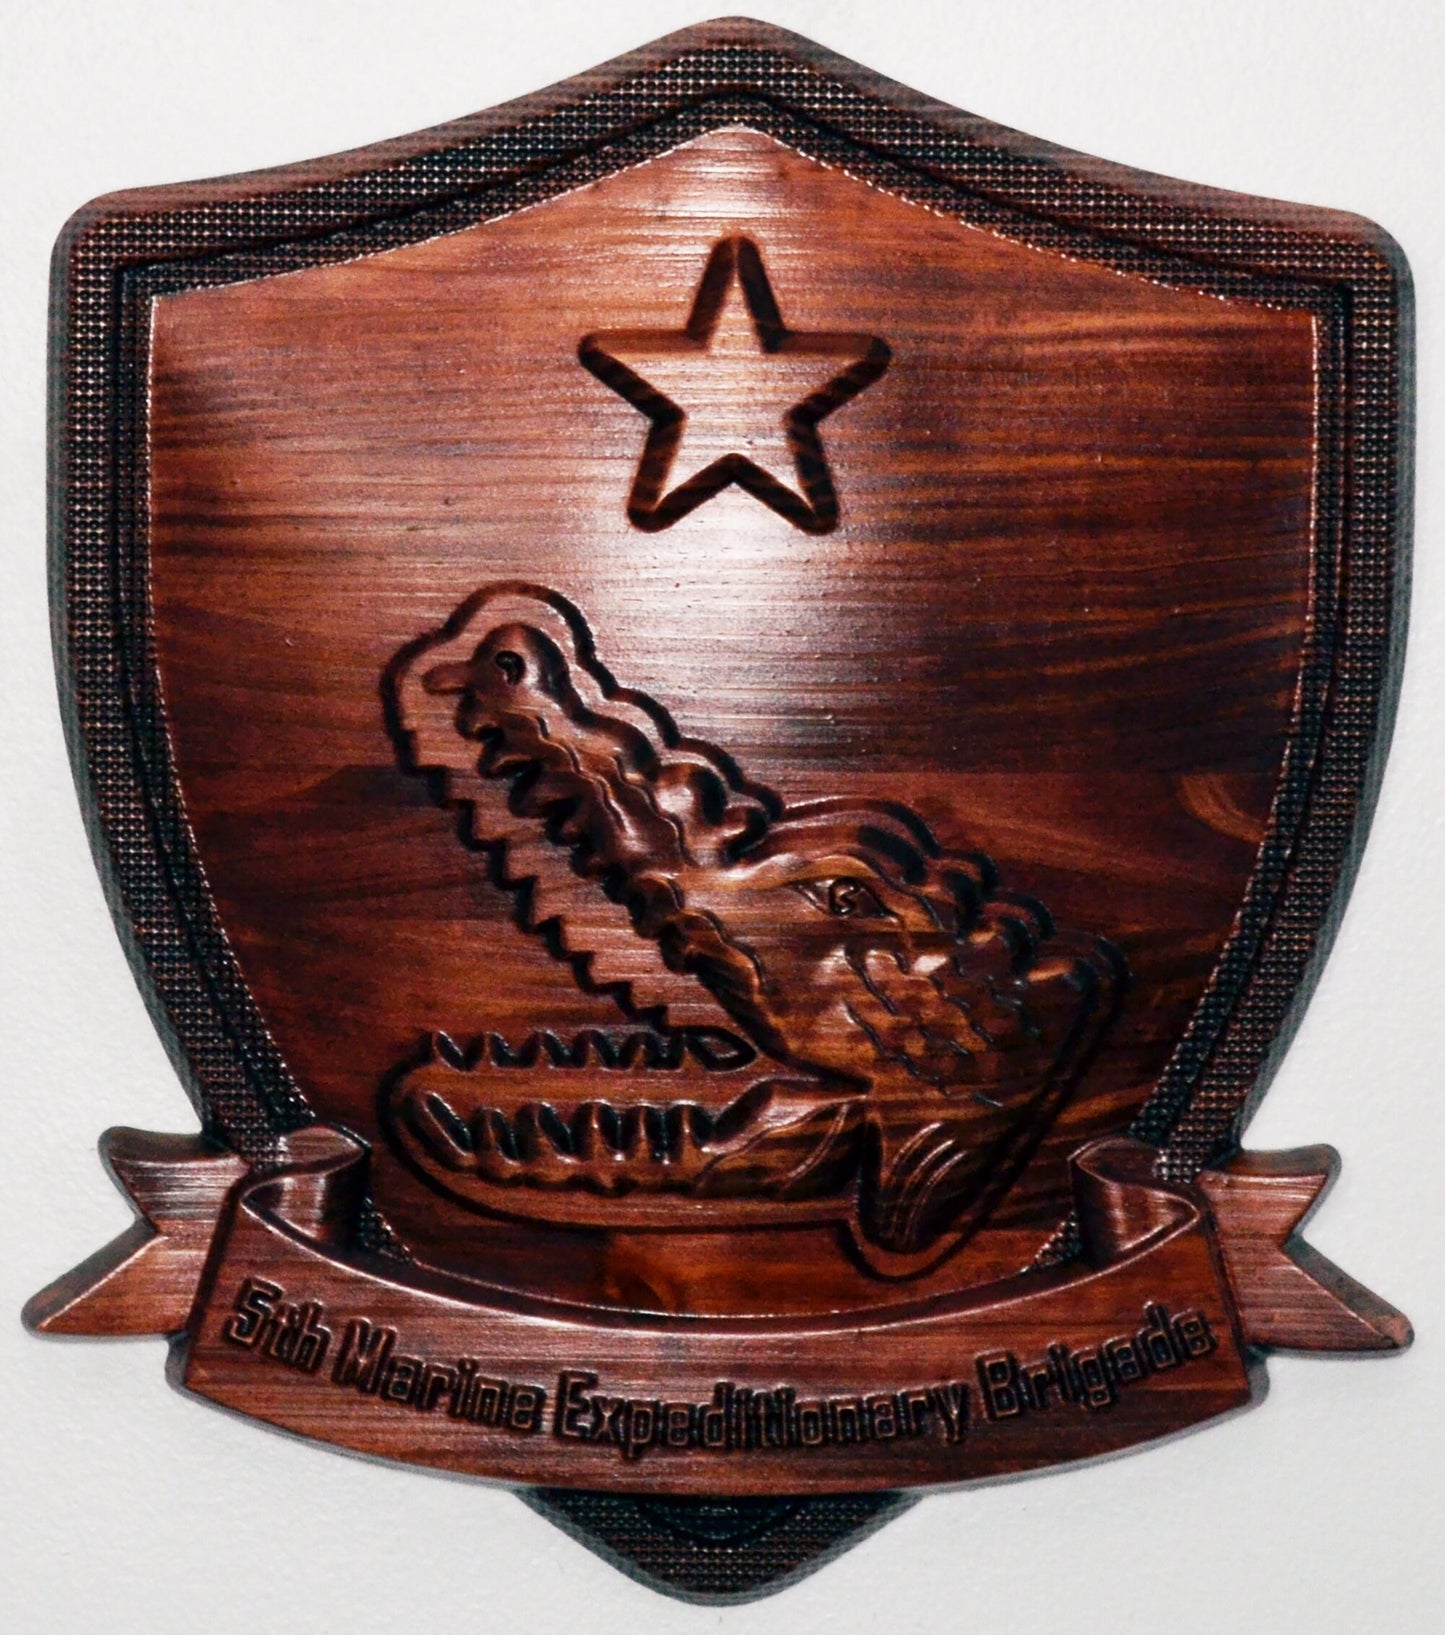 USMC 5th Marine Expeditionary Brigade, stained 3d wood carving, military plaque